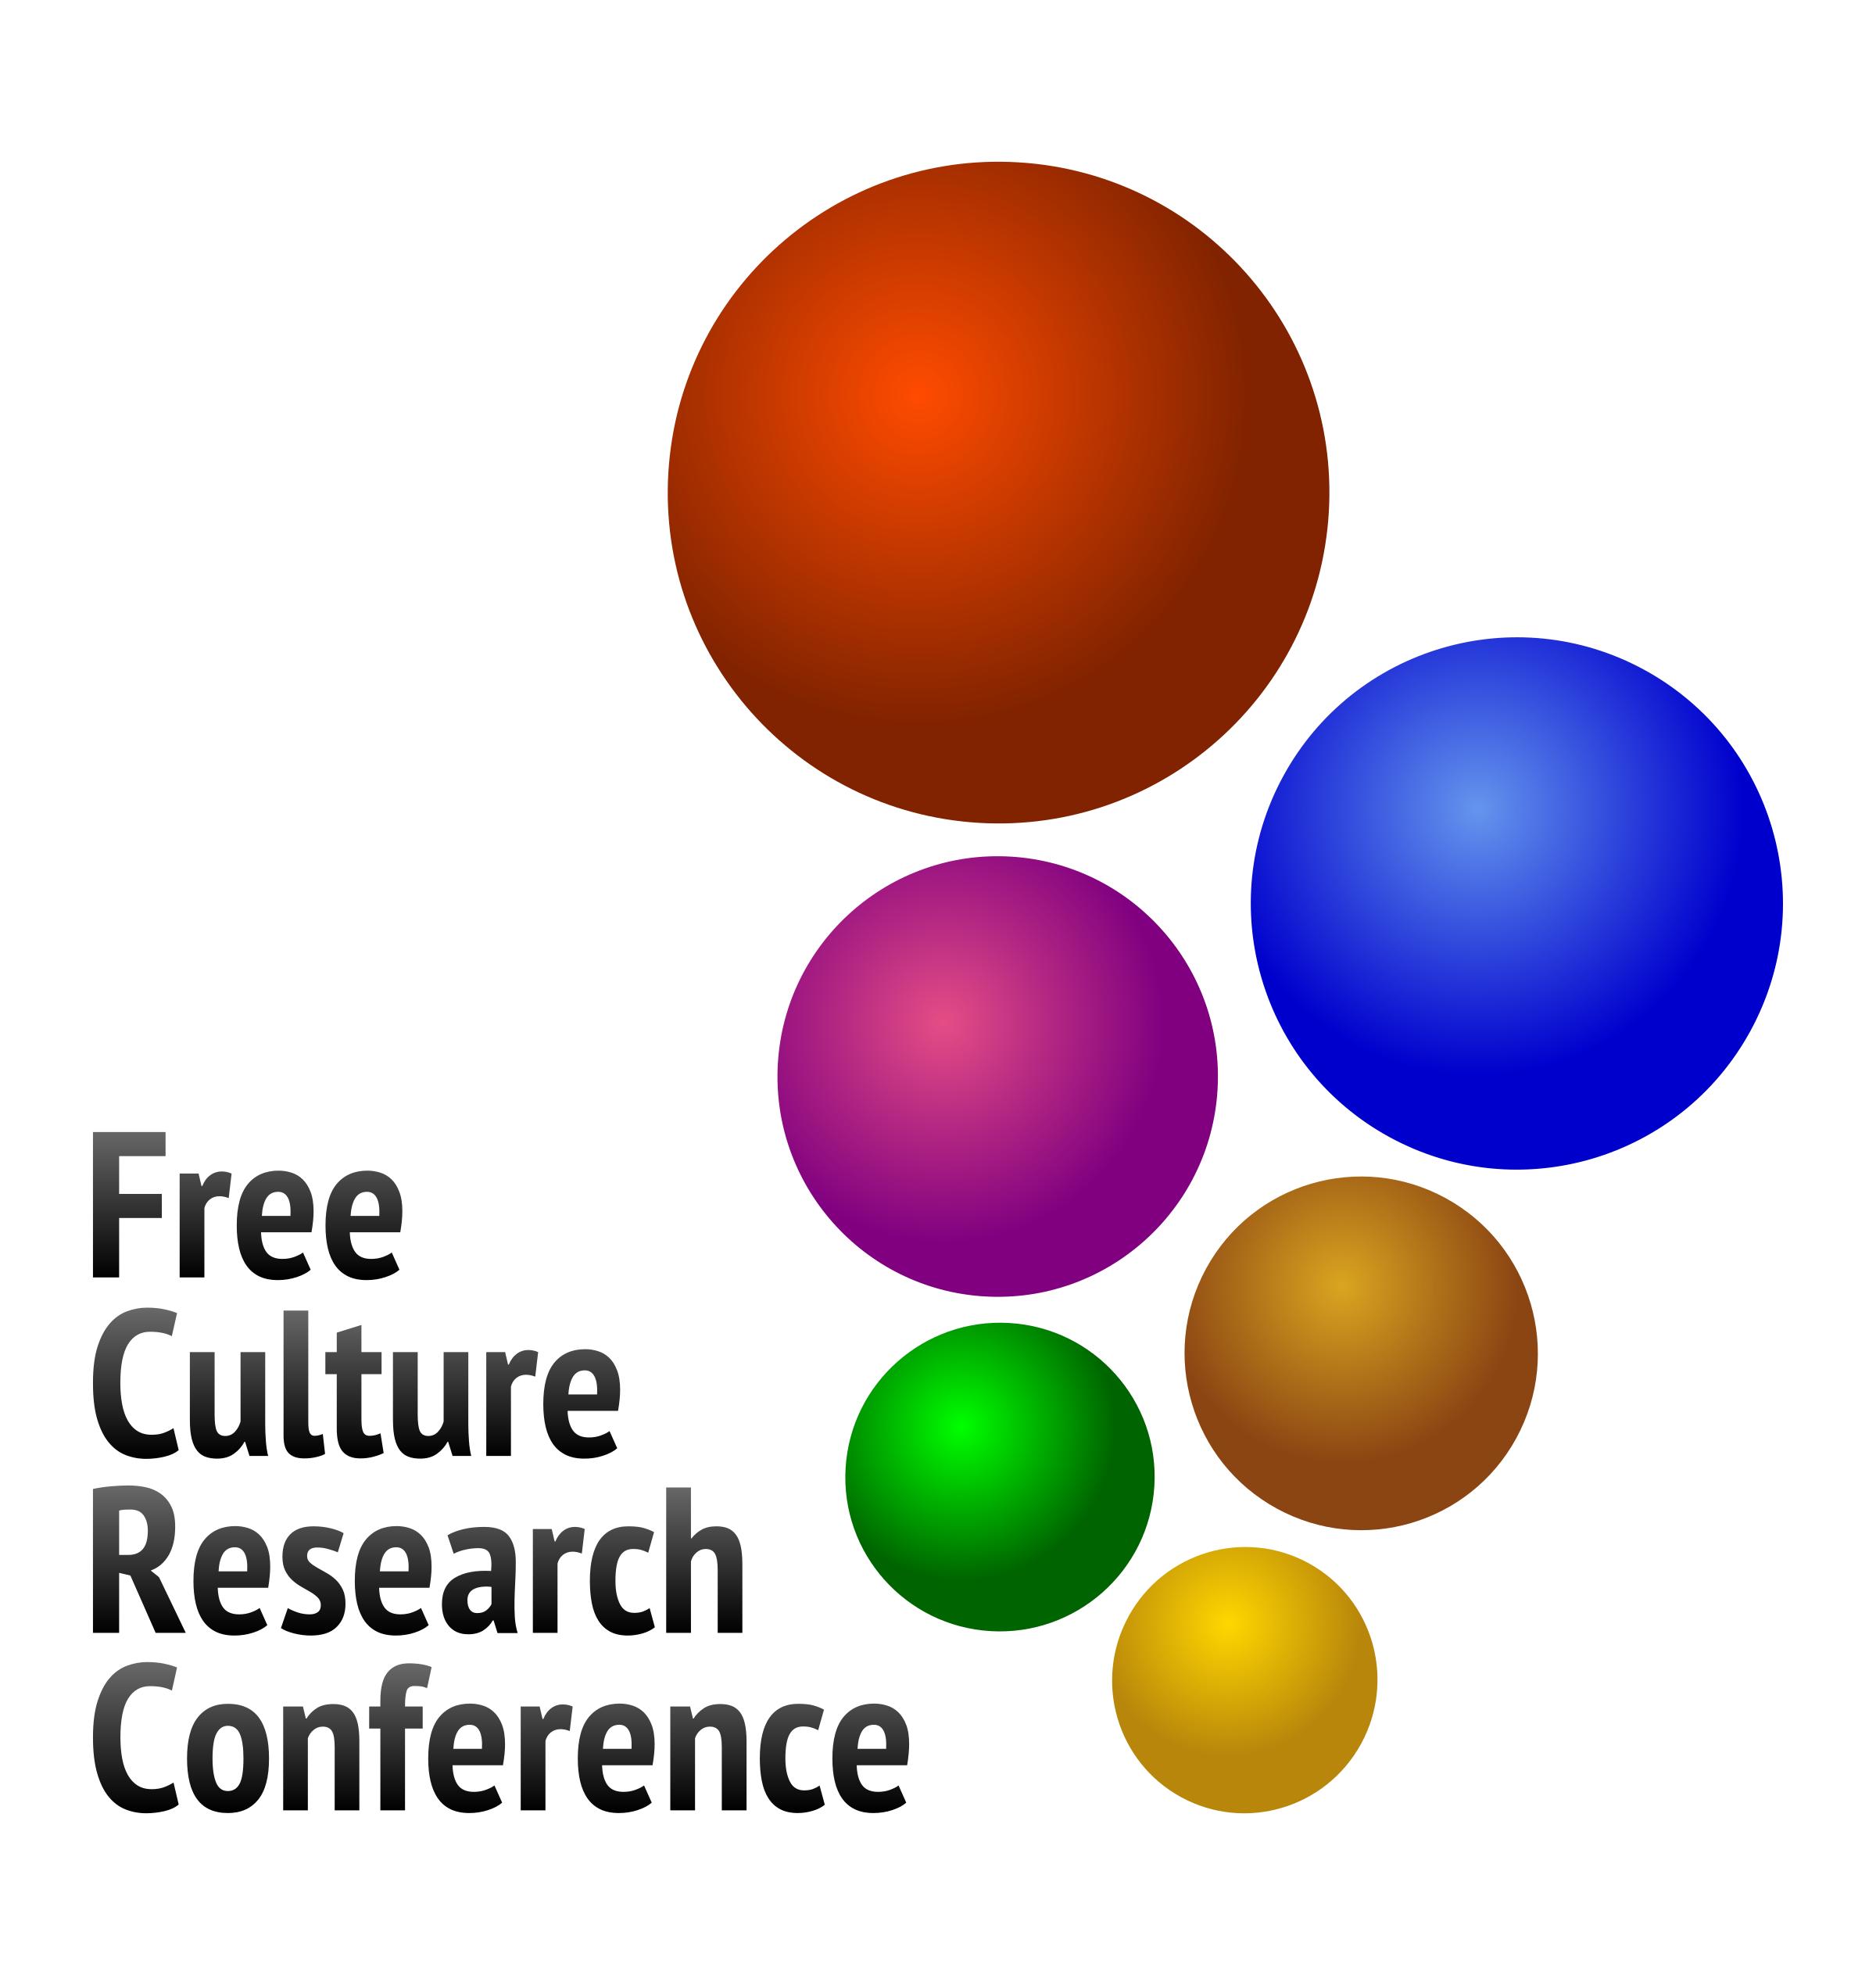 Free Culture Research Conference logo V2 icons